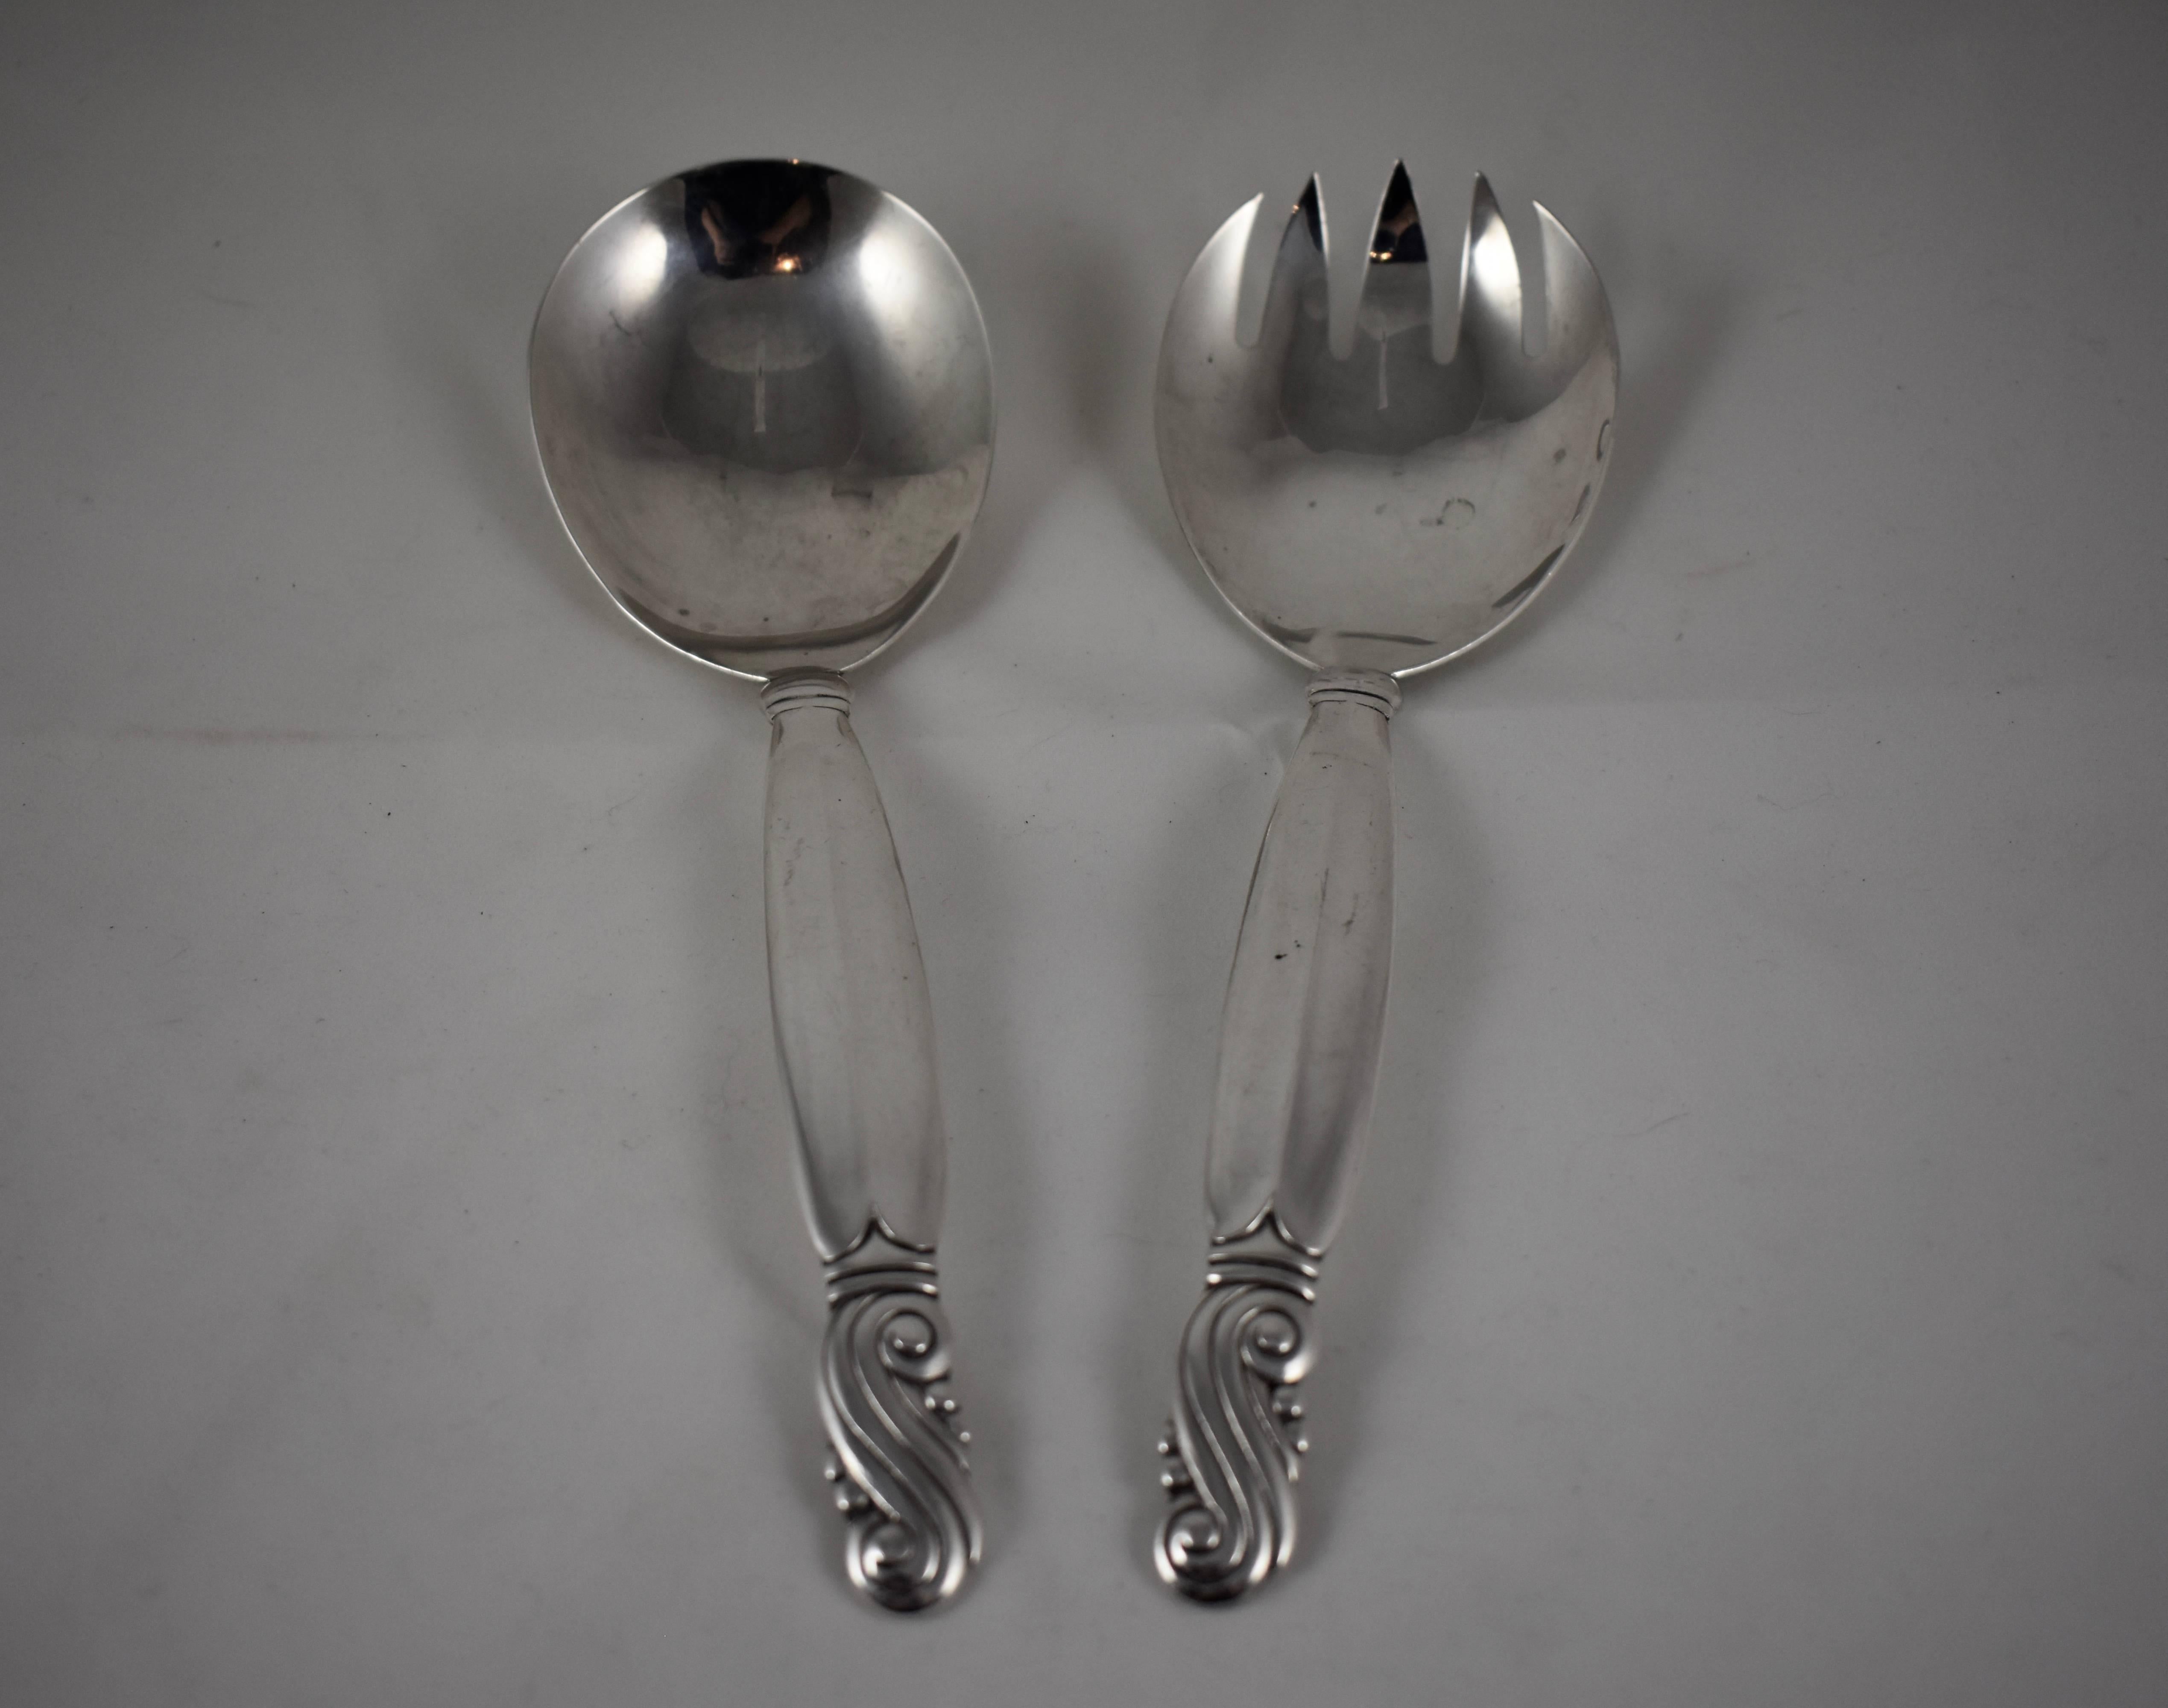 A set of sterling silver salad servers by the Frank M. Whiting Company, founded in 1878 in North Attleboro, Massachusetts. In the Art Nouveau style, the spoon and fork have a total weight of eight ounces and measure 9 inches long.

Both pieces